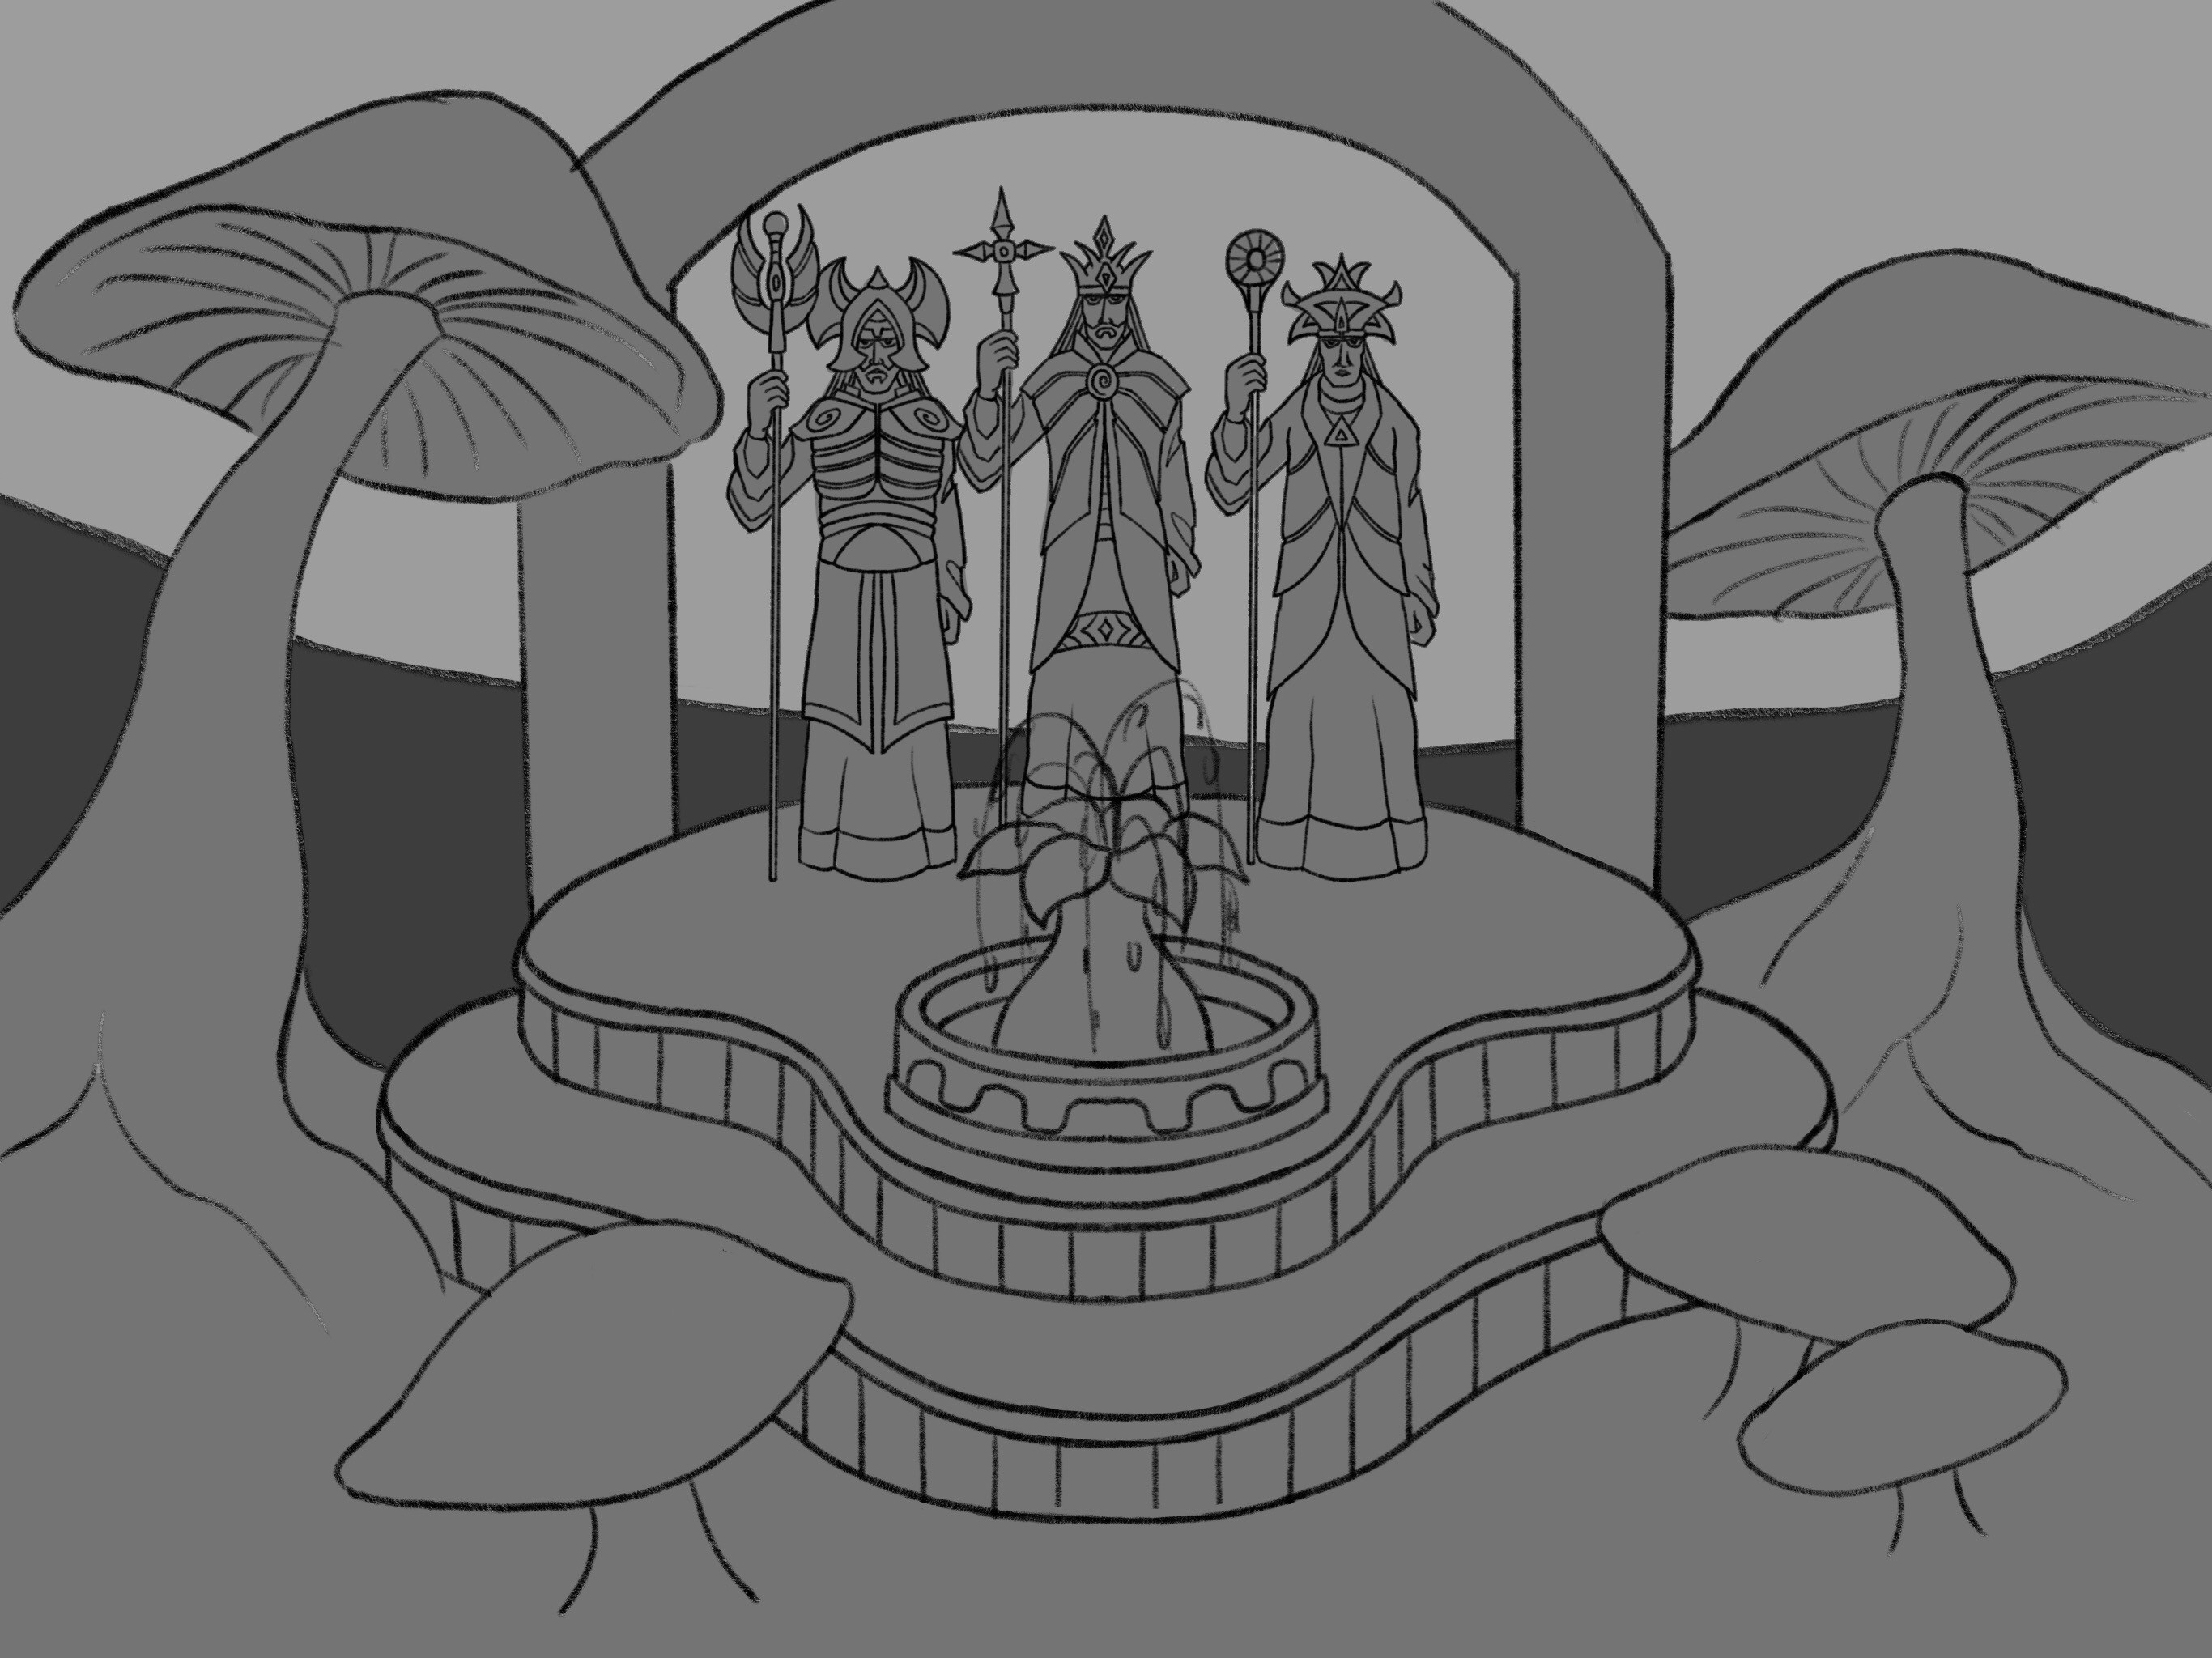 Statues Courtyard Sketch